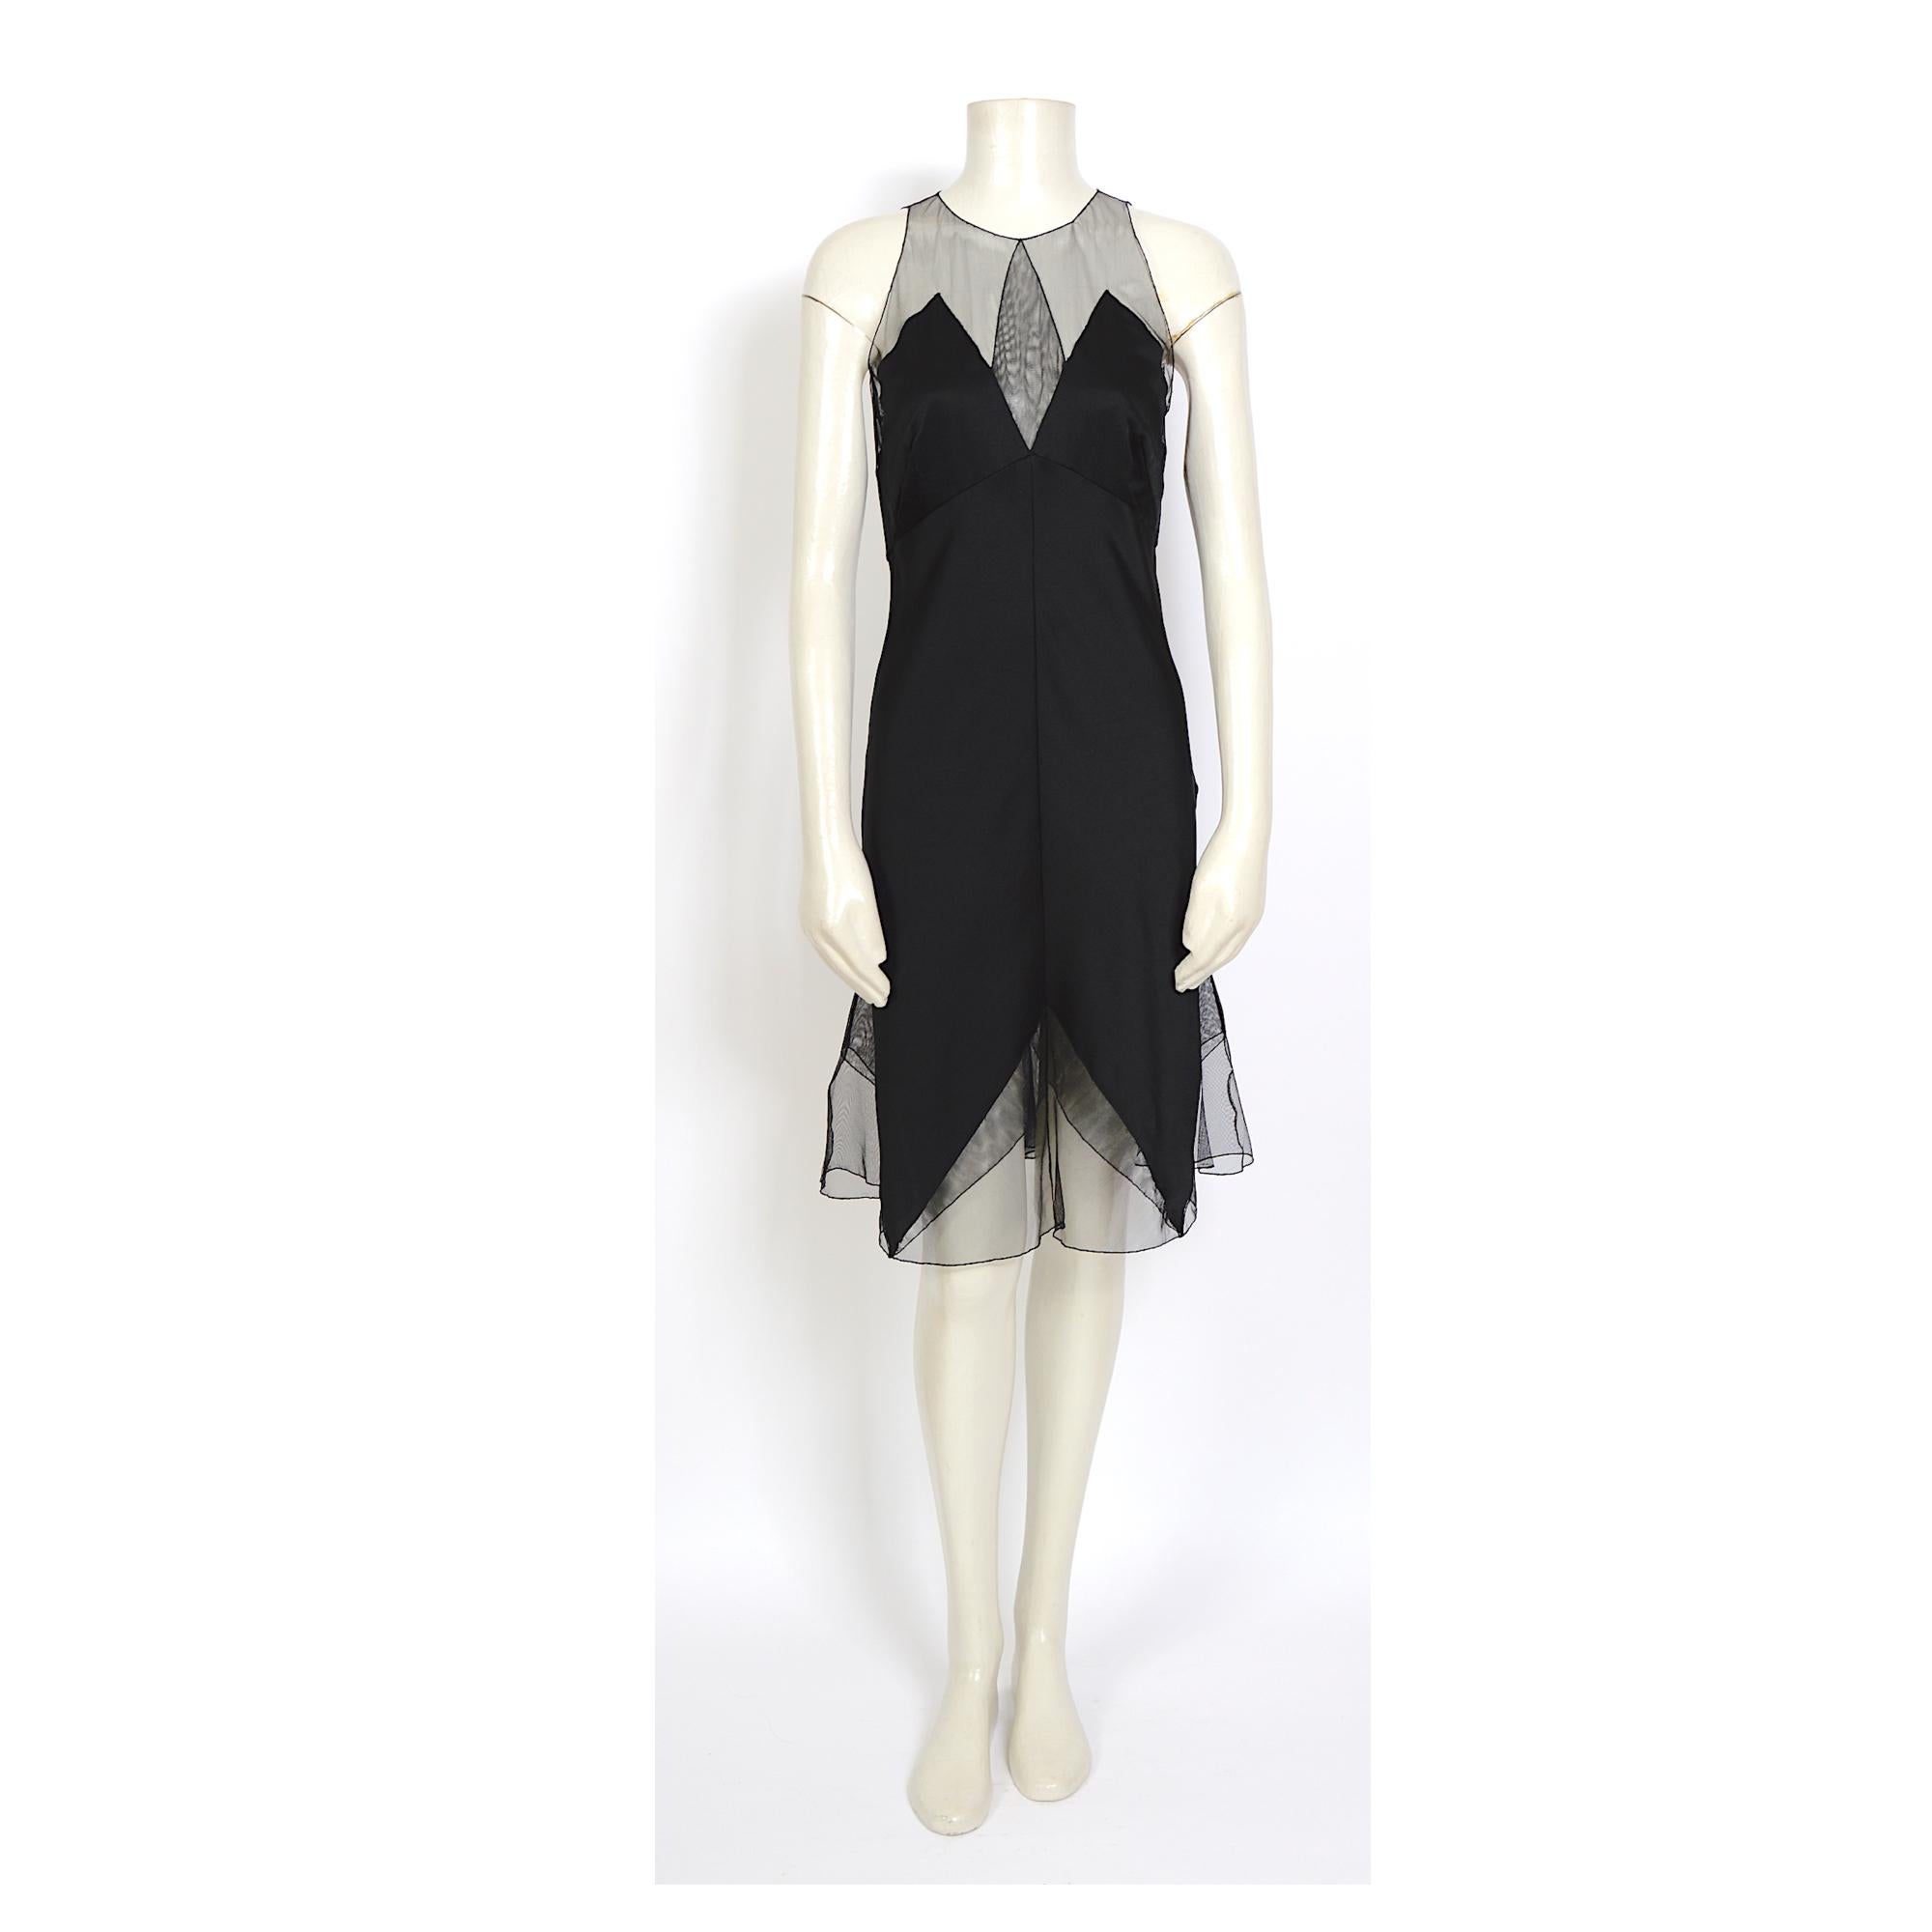 Absolutely stunning Karl Lagerfeld fall 1994 - 1995 vintage black silk dress and matching top
Made in light black silk and tulle material. The dress closes with covered fabric buttons at the back. Two buttons have been replaced.
Made in France -